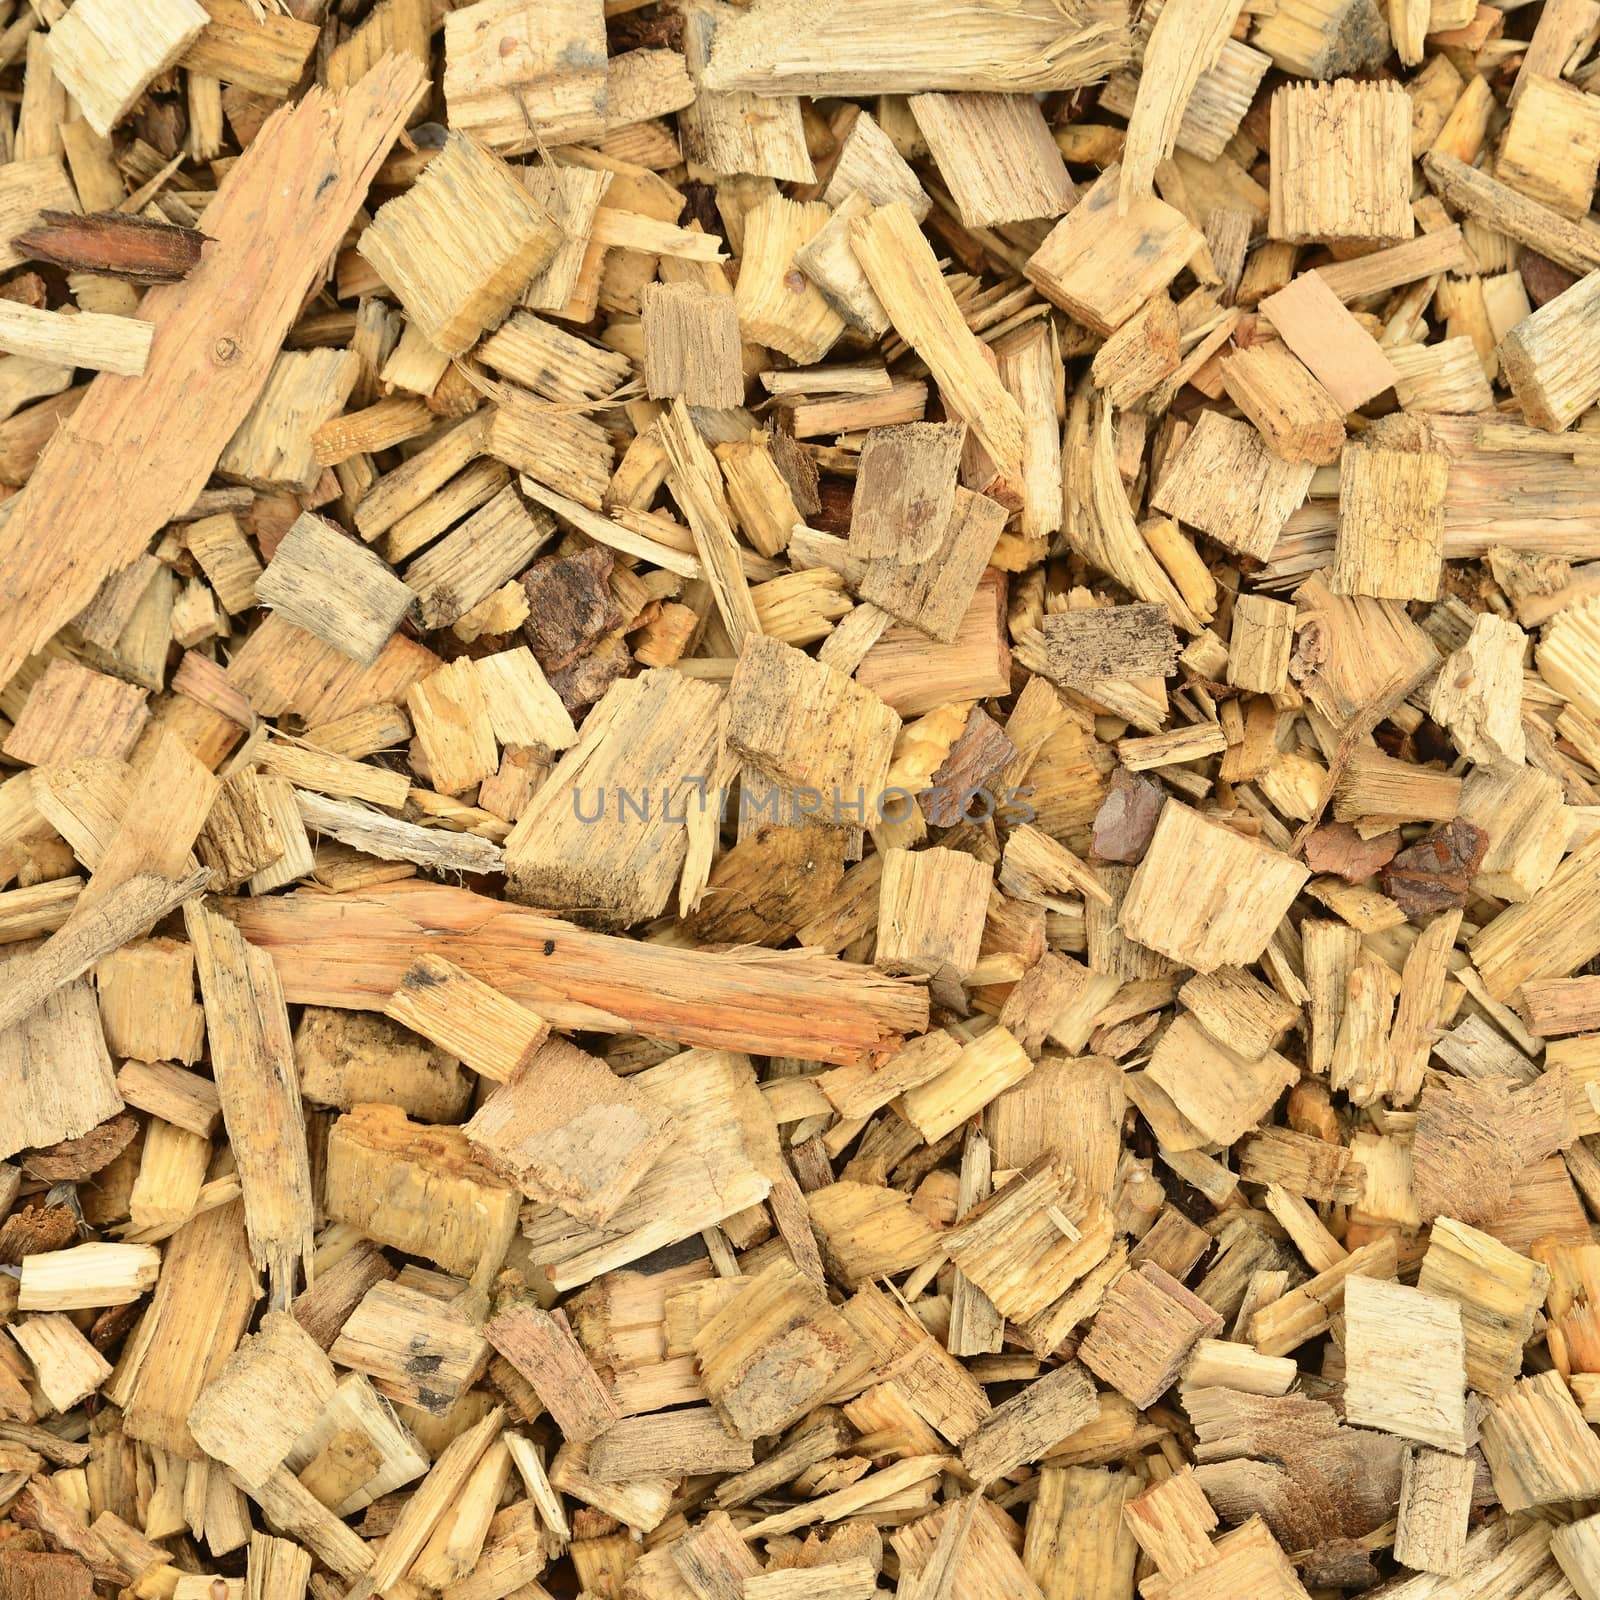 Wood chip by a40757